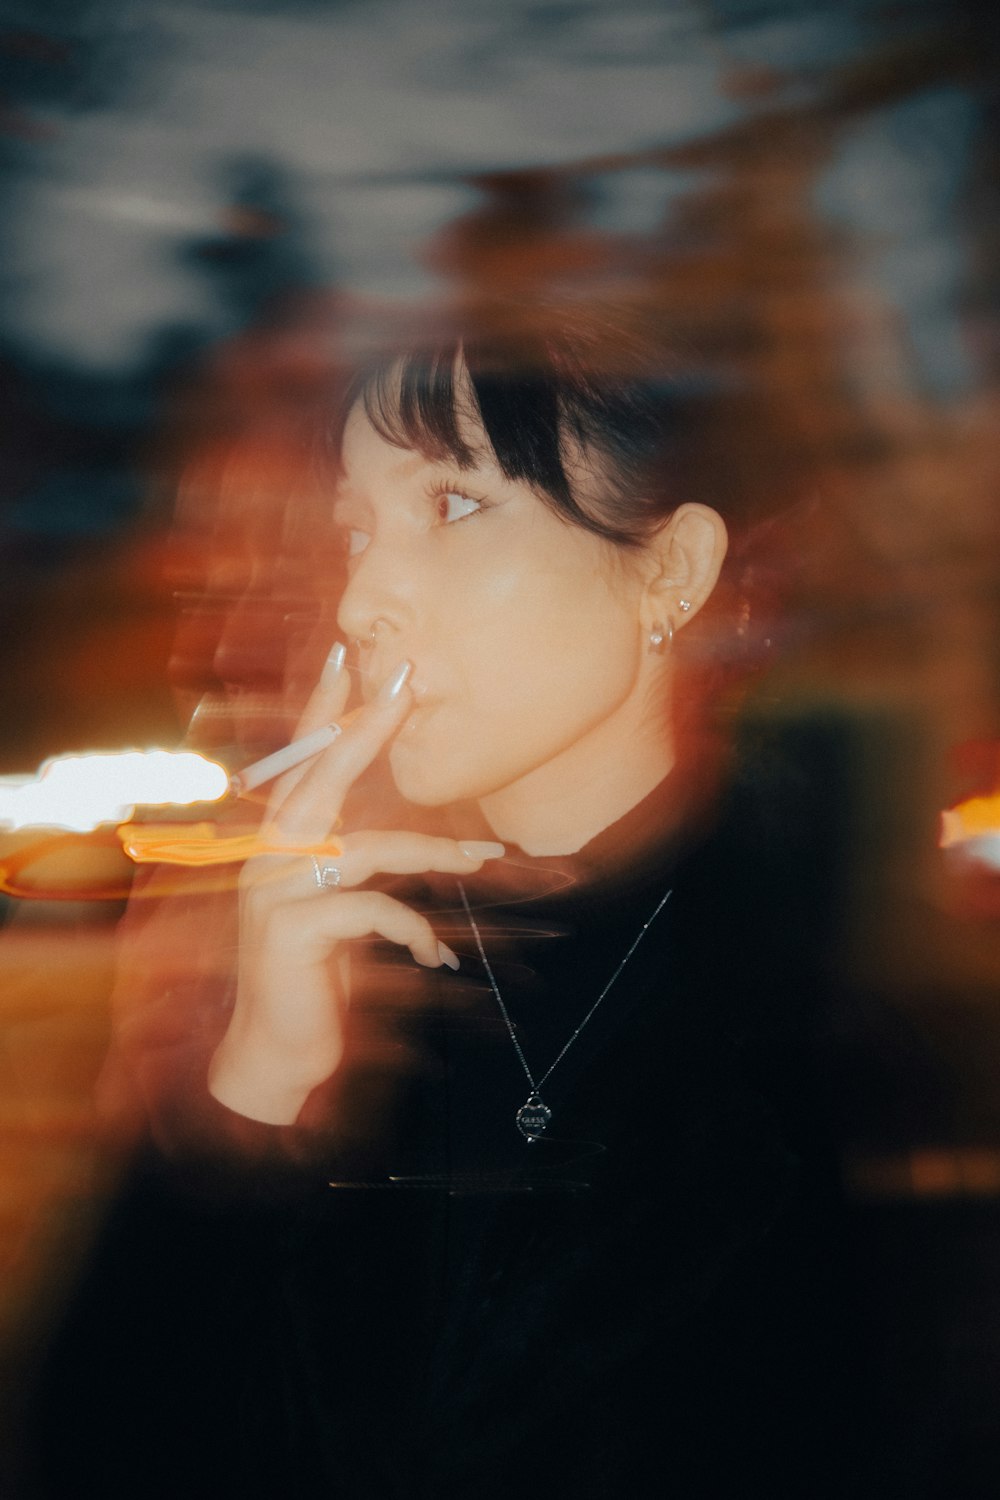 a woman smoking a cigarette in a blurry photo